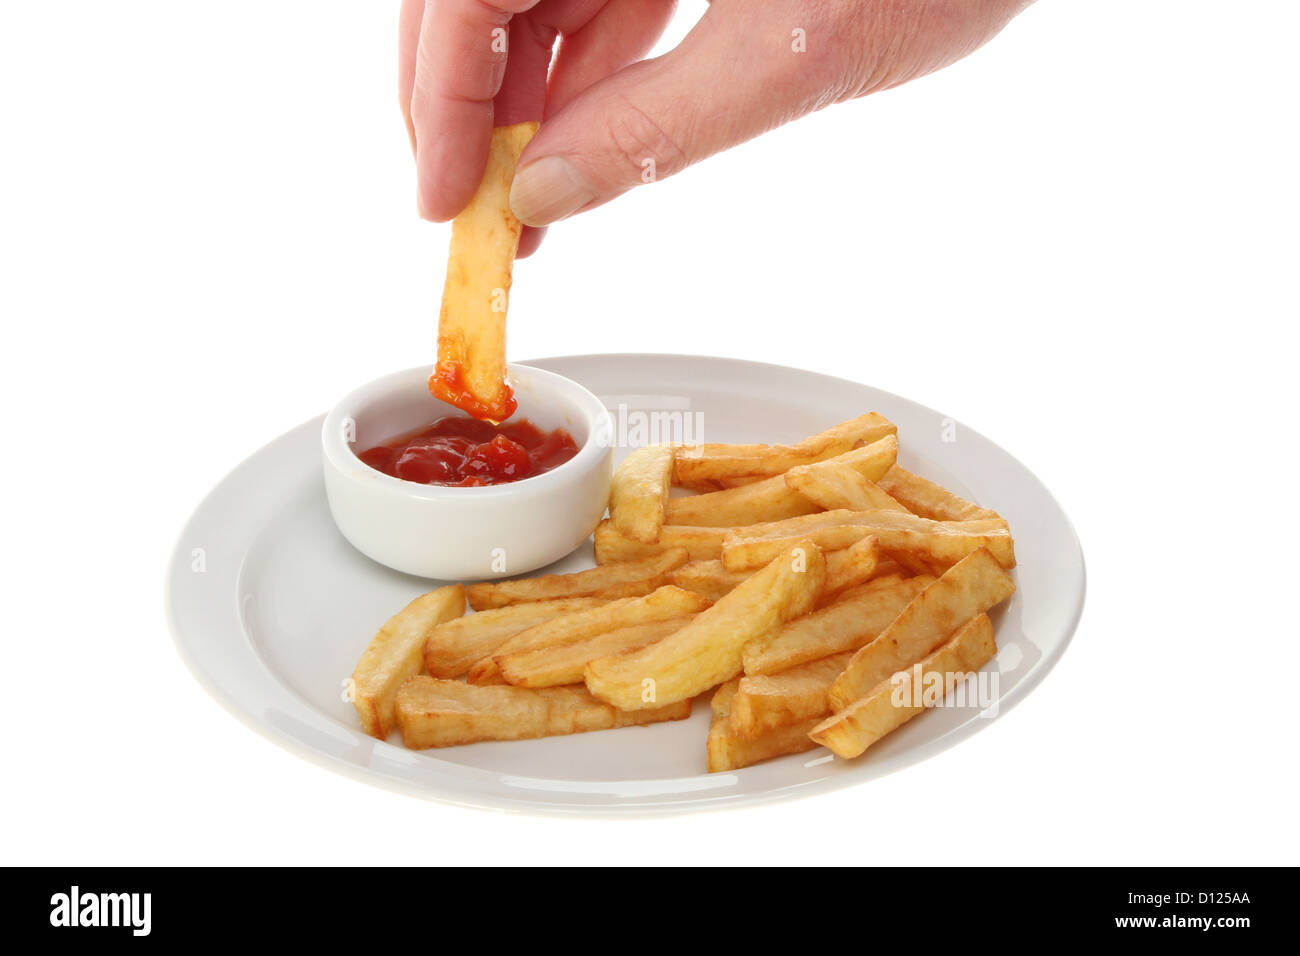 Hand dipping a French fry into tomato ketchup in a ramekin next to fries on a plate isolated against white Stock Photo